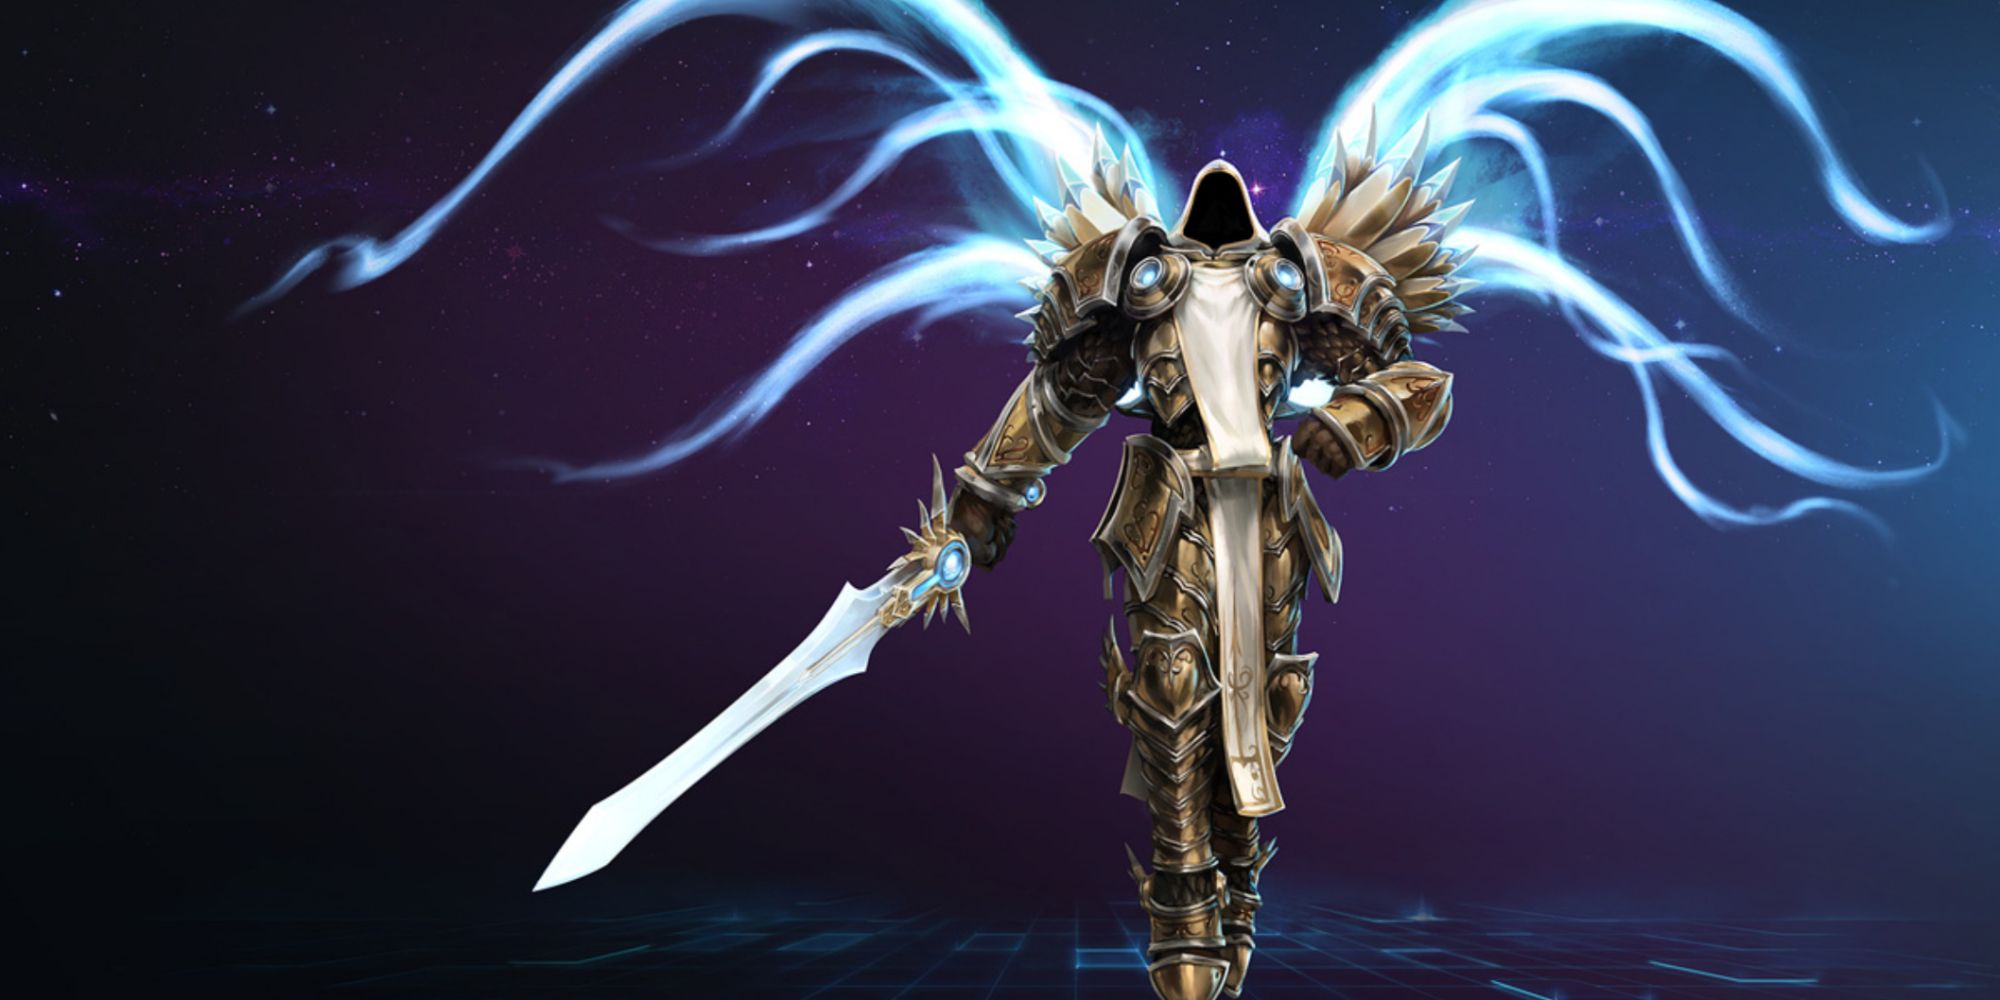 Diablo Tyrael in angel form with wings and sword